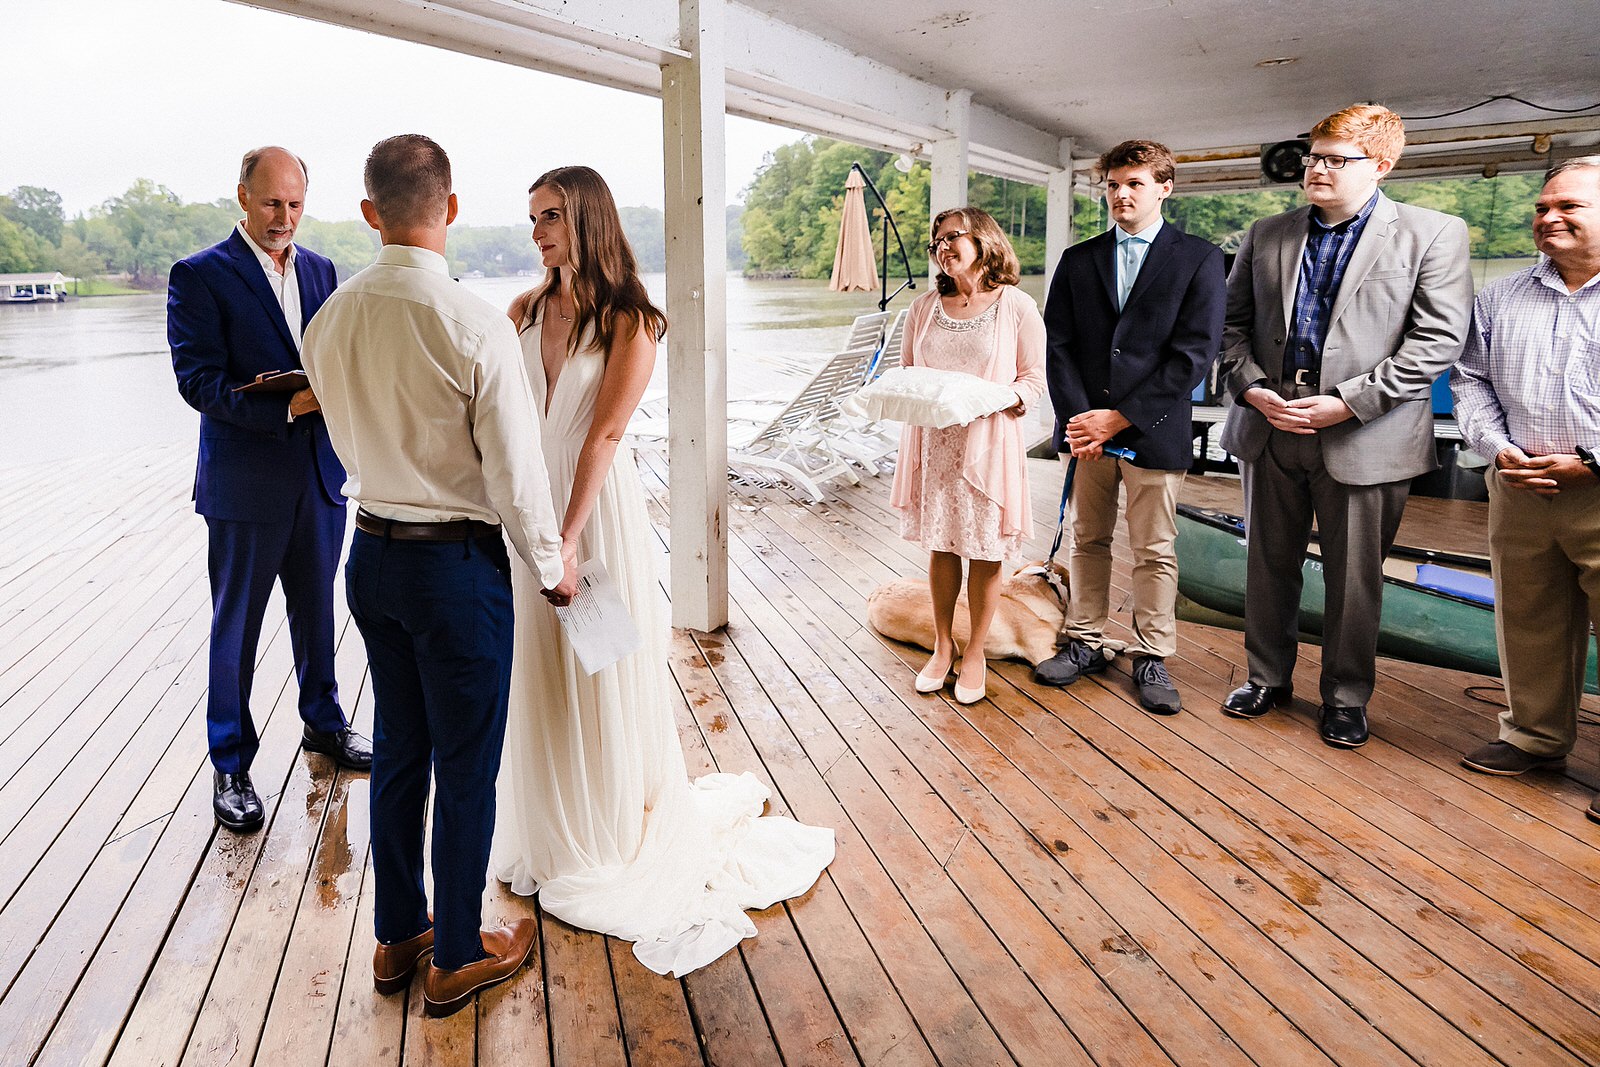 immediate family watches a microwedding. The couple's initial plans were derailed because of Covid19